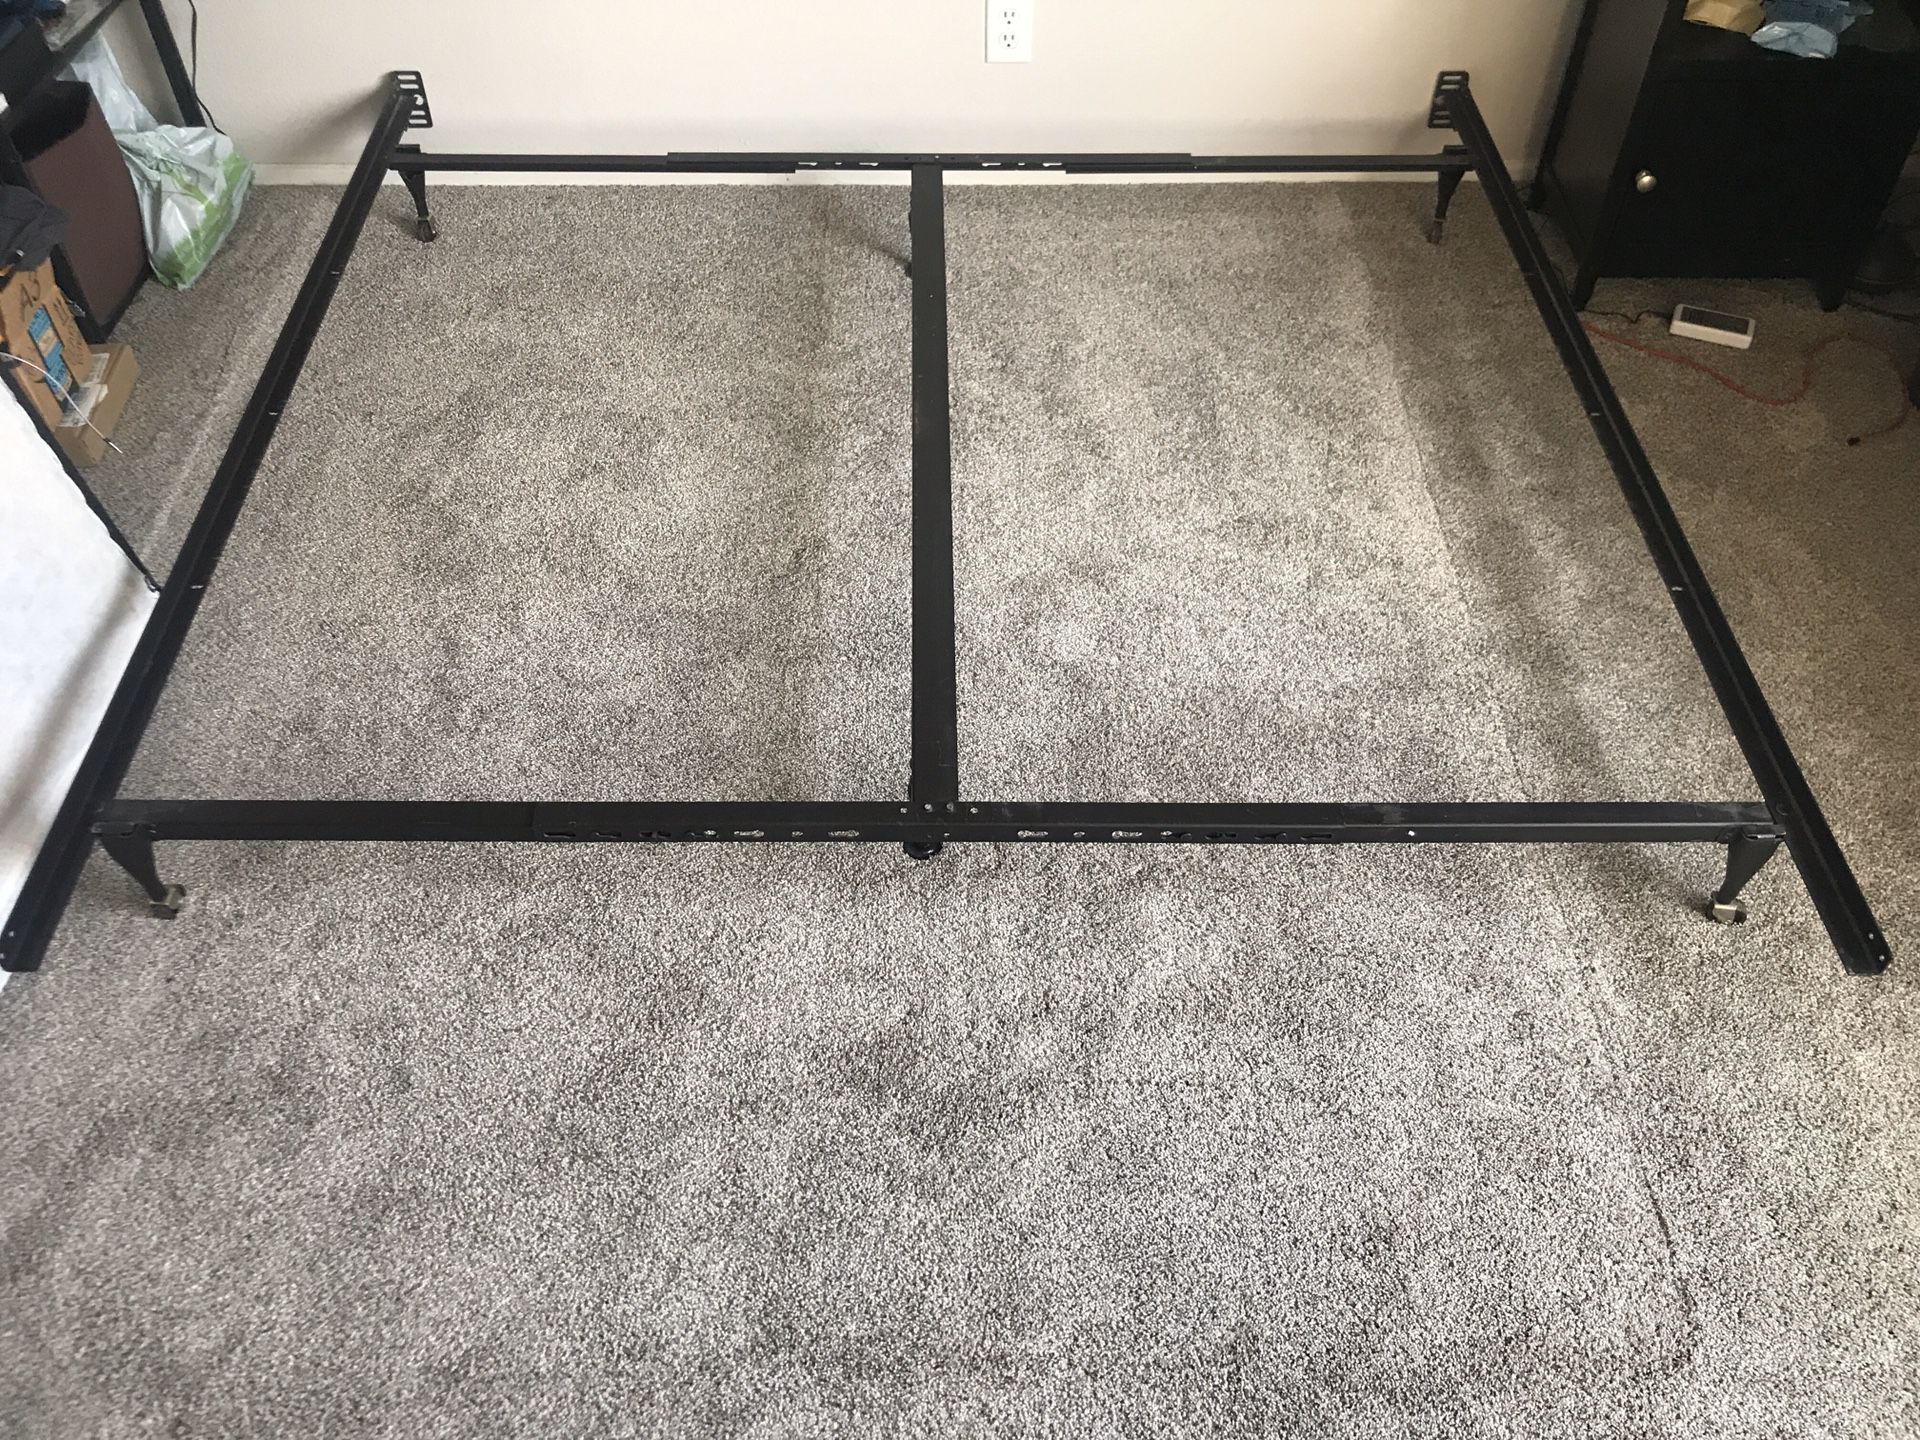 Adjustable king or queen size bed frame